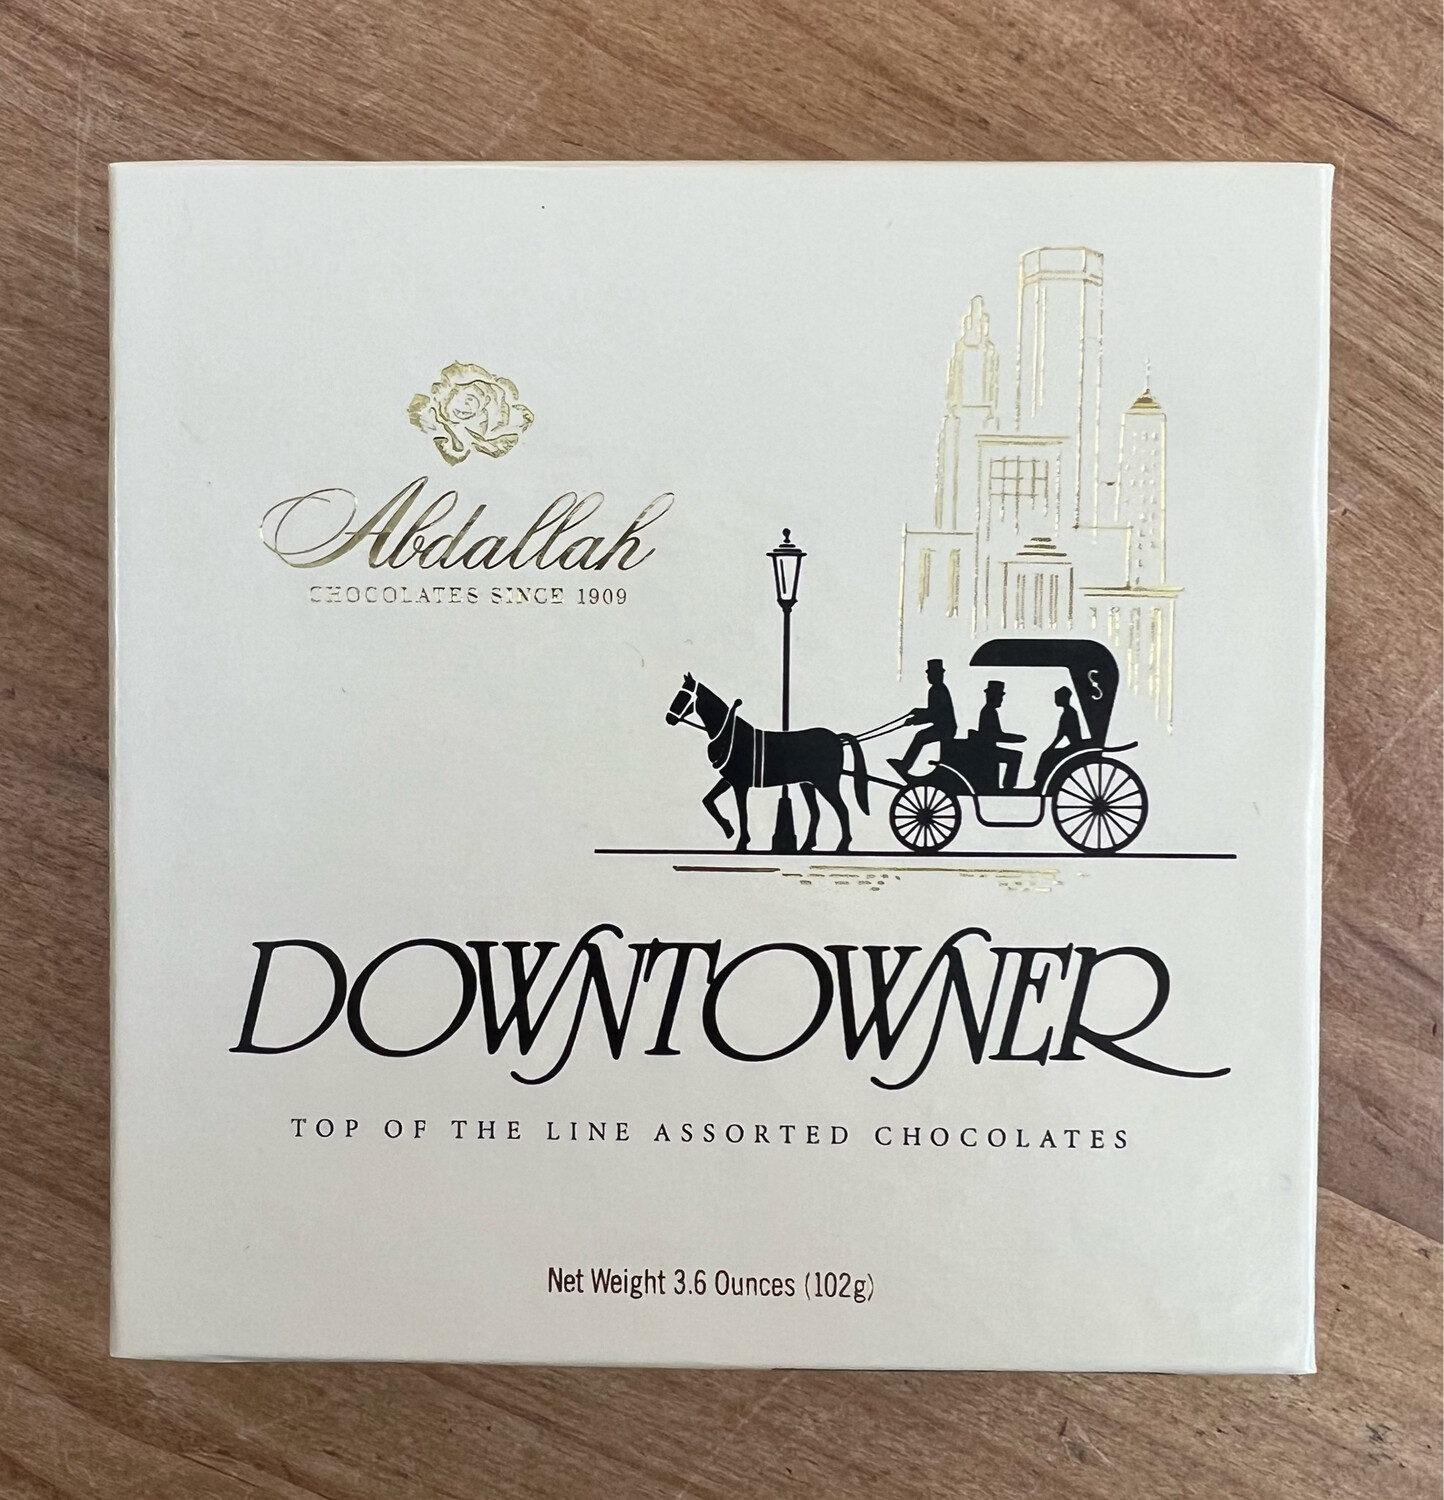 Downtowner 3.6oz